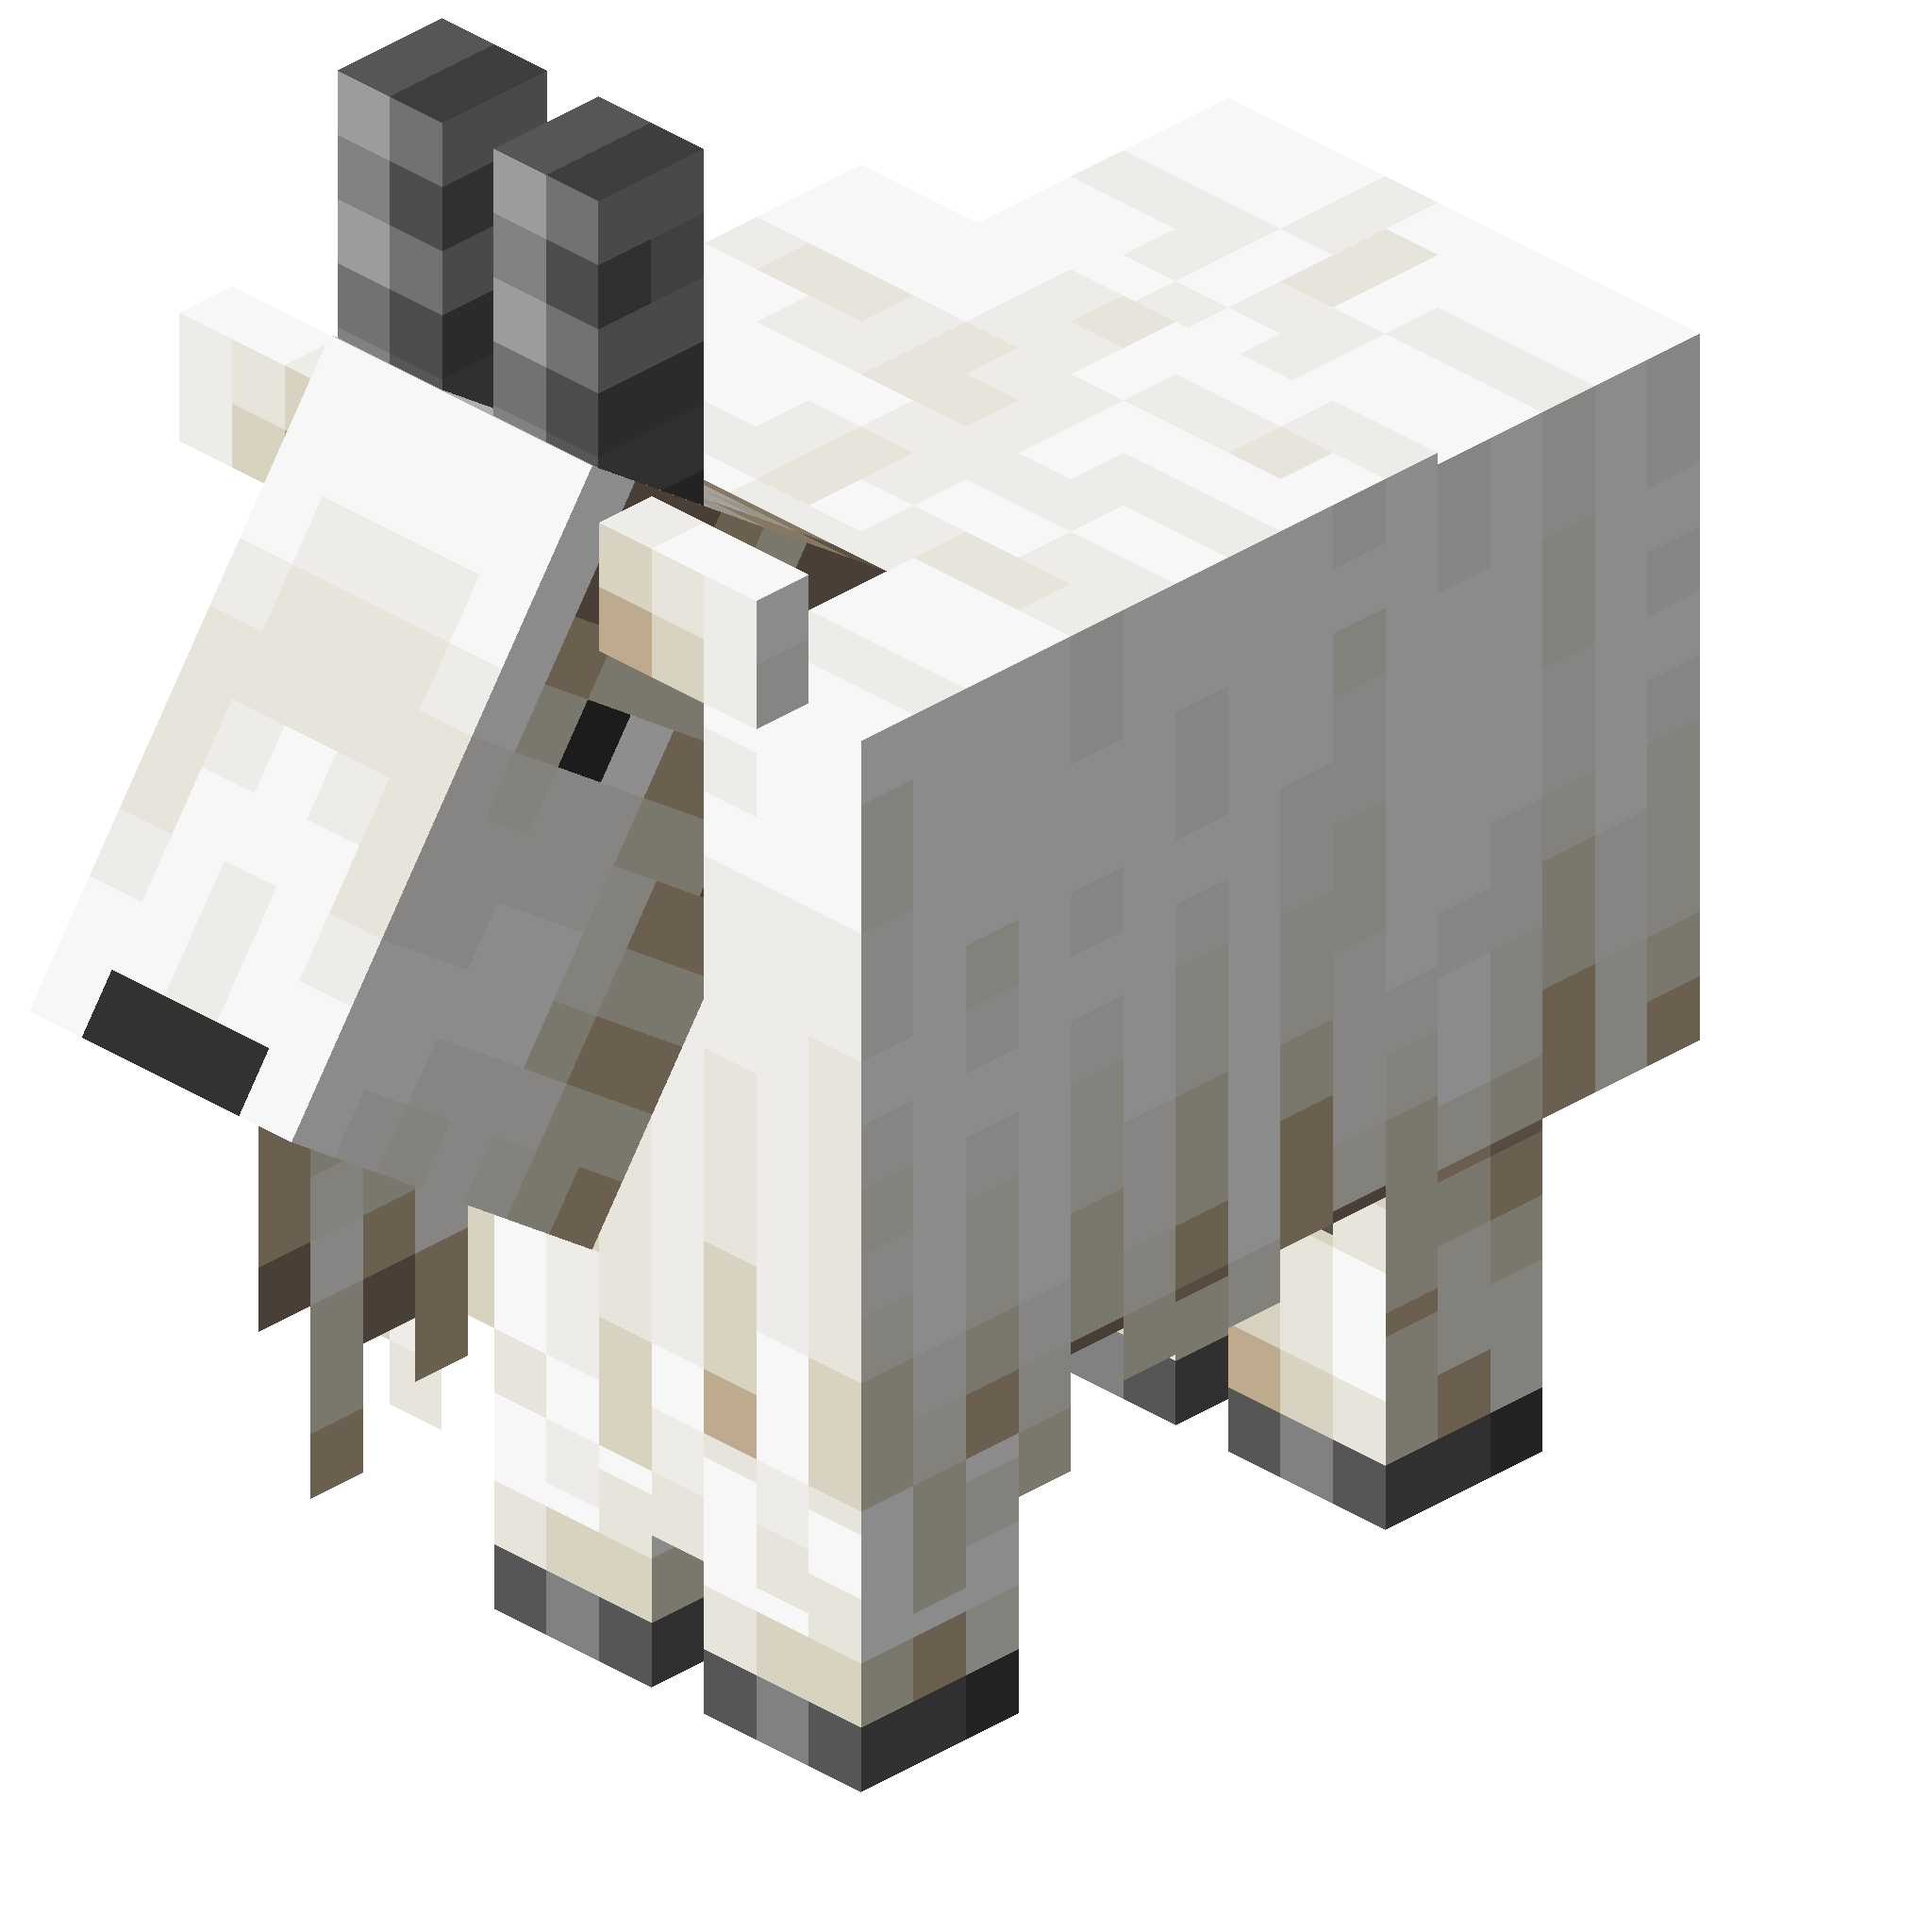 https://static.wikia.nocookie.net/minecraft_gamepedia/images/f/f8/Goat_JE1_BE1.png/revision/latest?cb=20220408211907